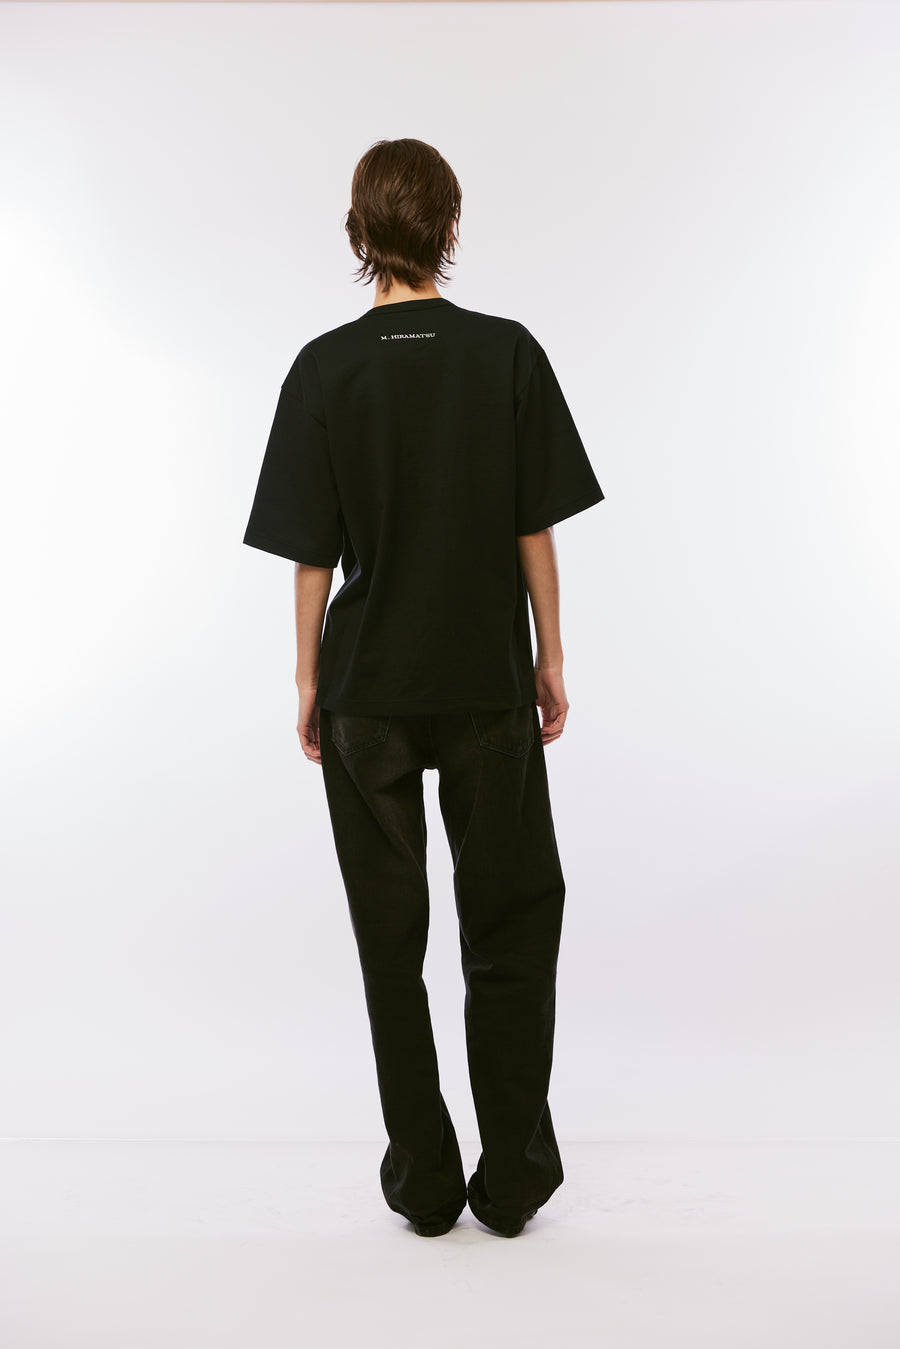 Logo Tee with Ribbons - BLACK